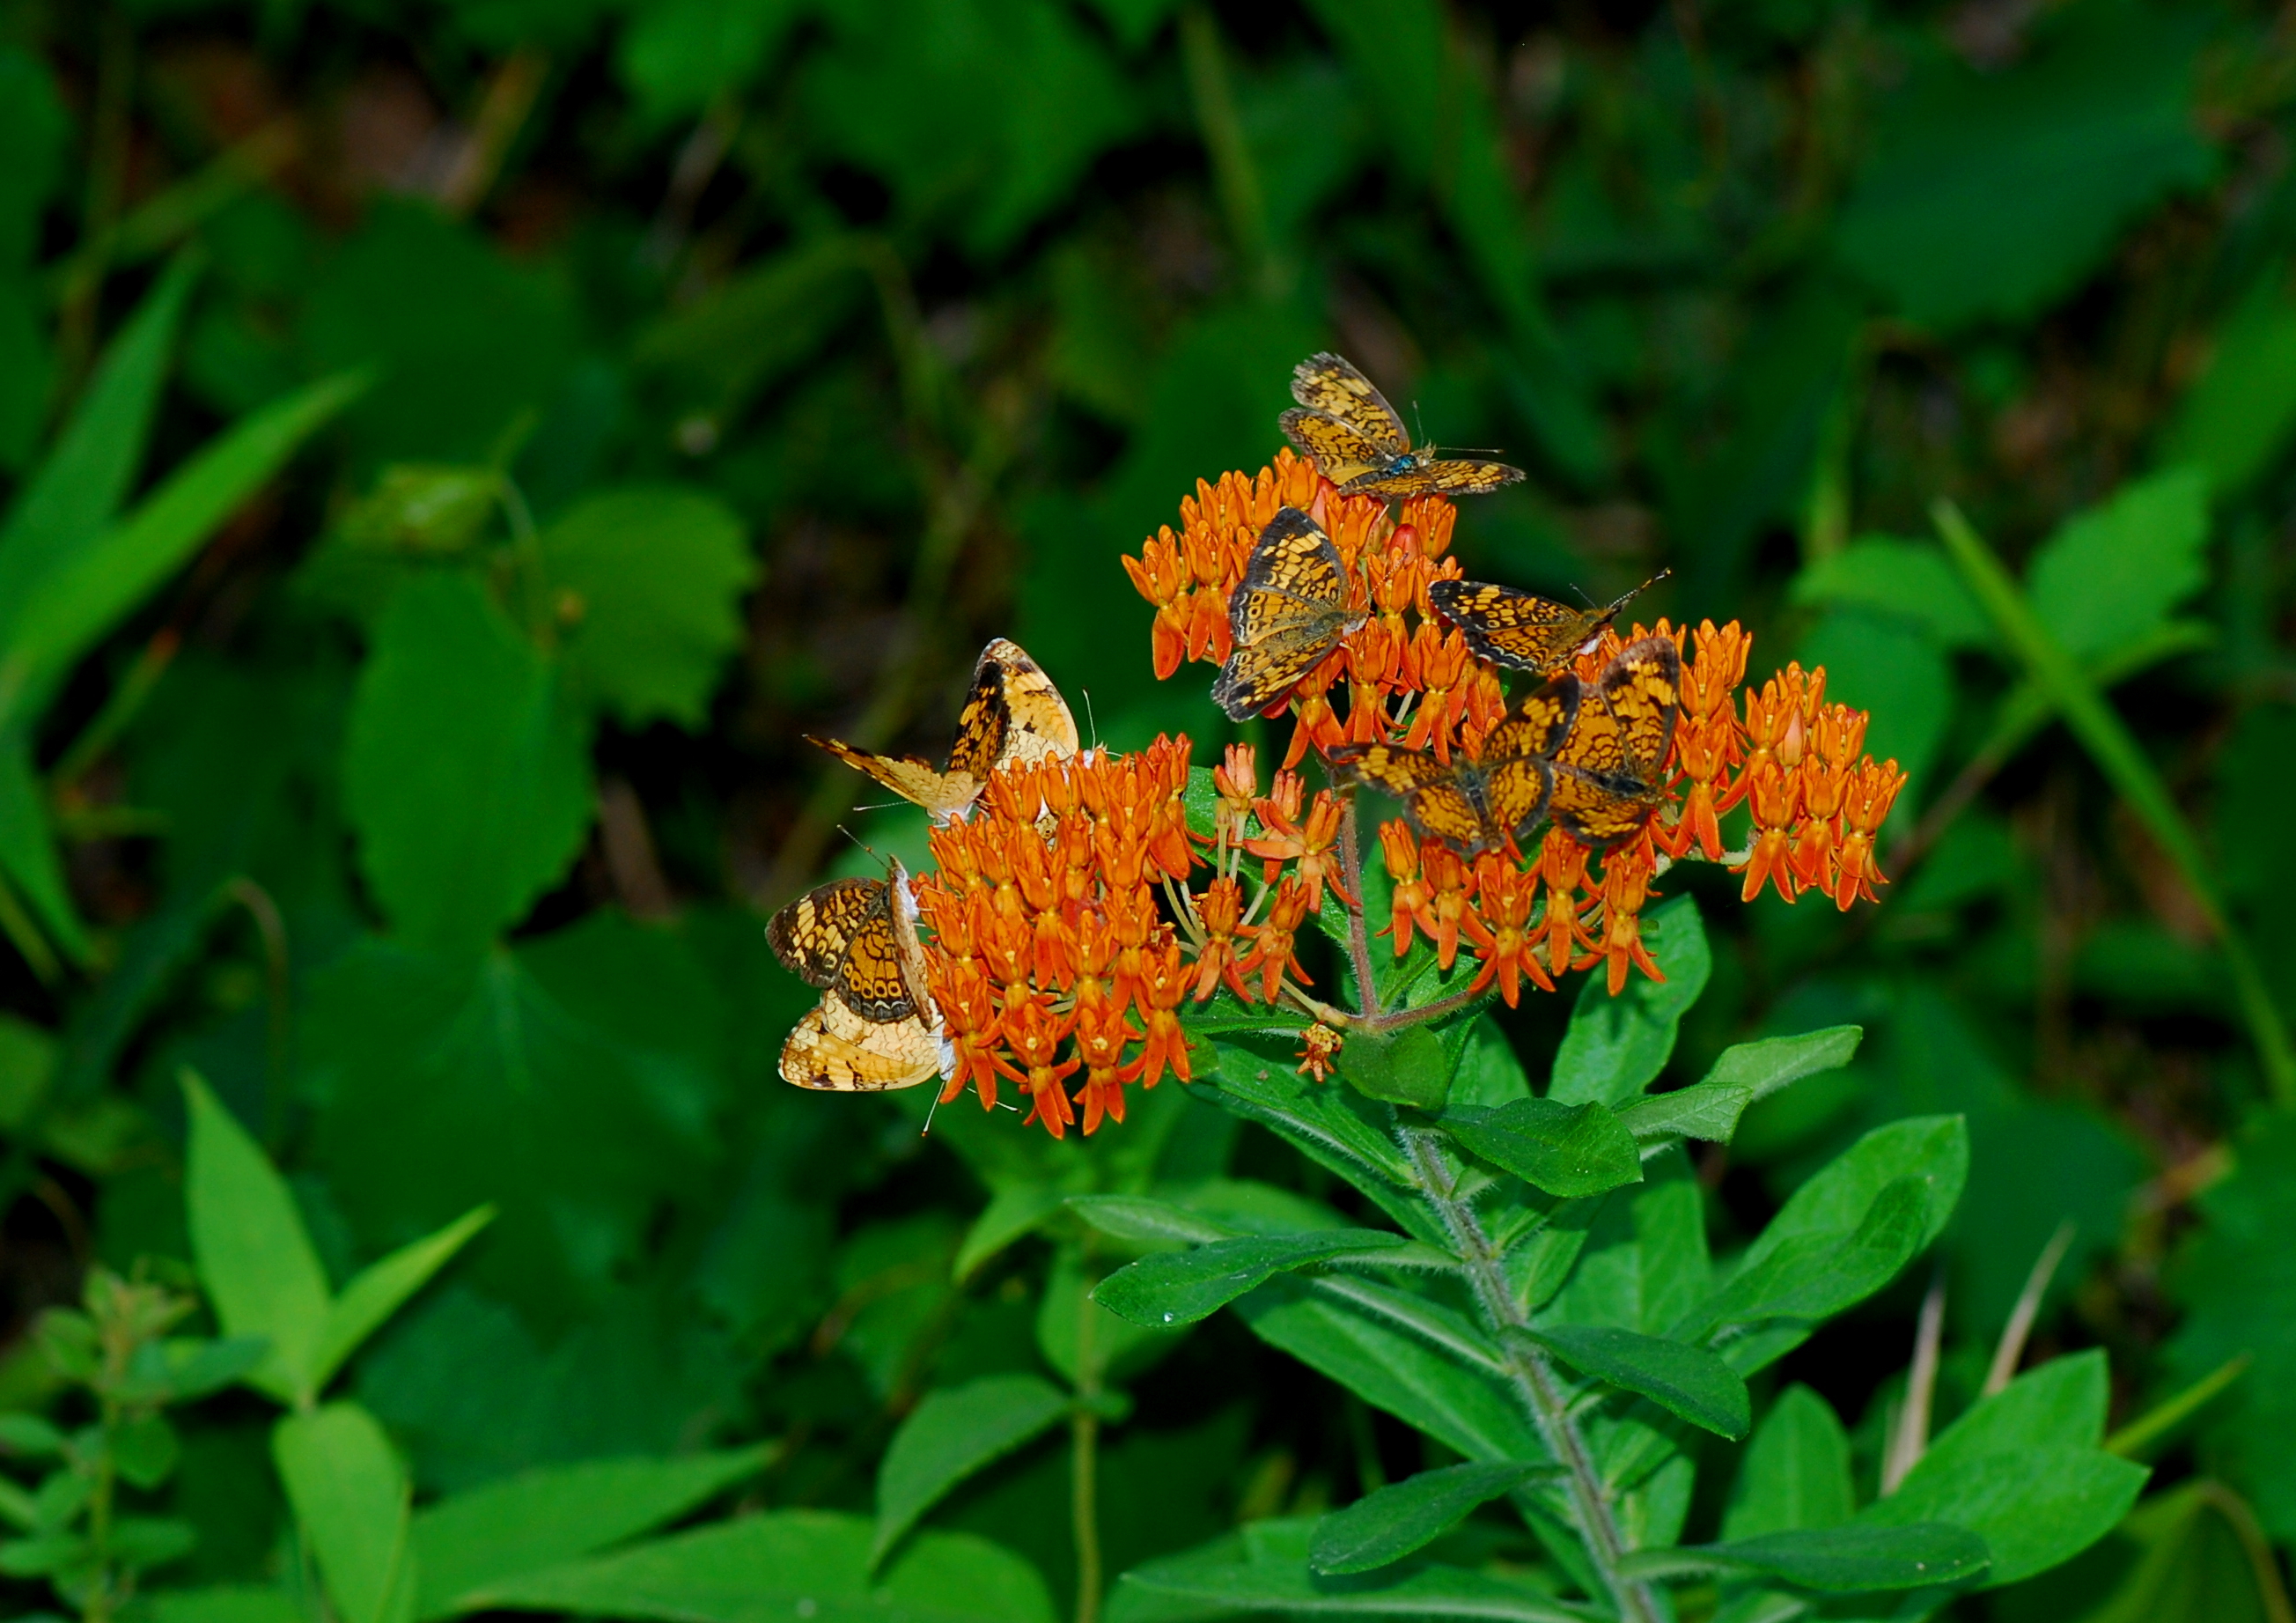 Several butterflies sit perched on an ornage butterfly weed.